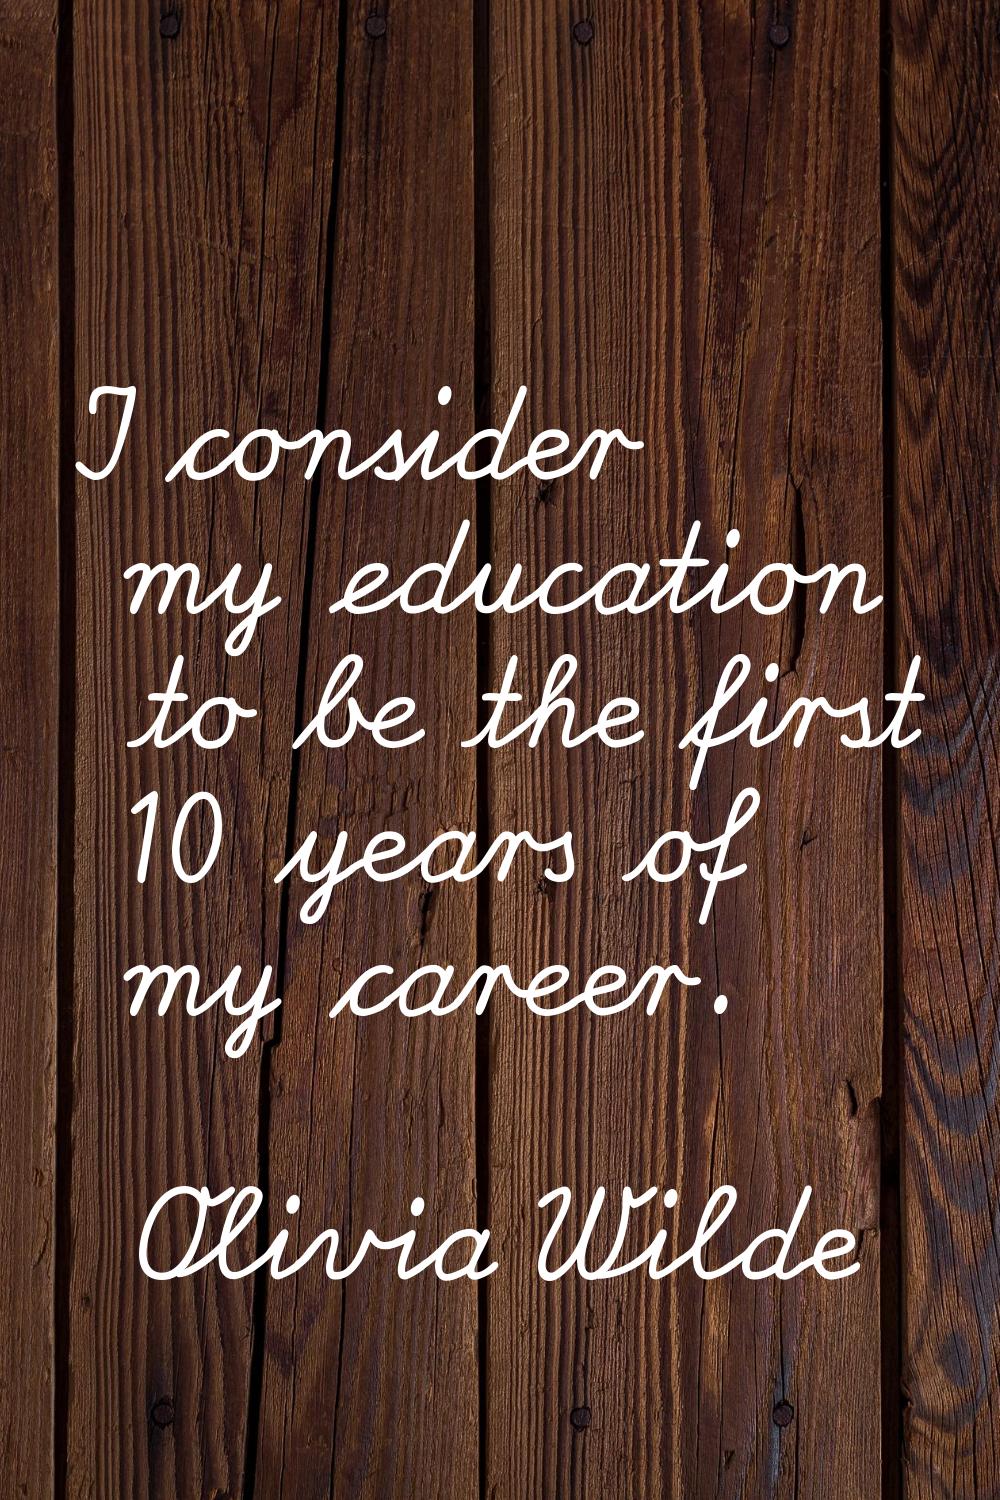 I consider my education to be the first 10 years of my career.